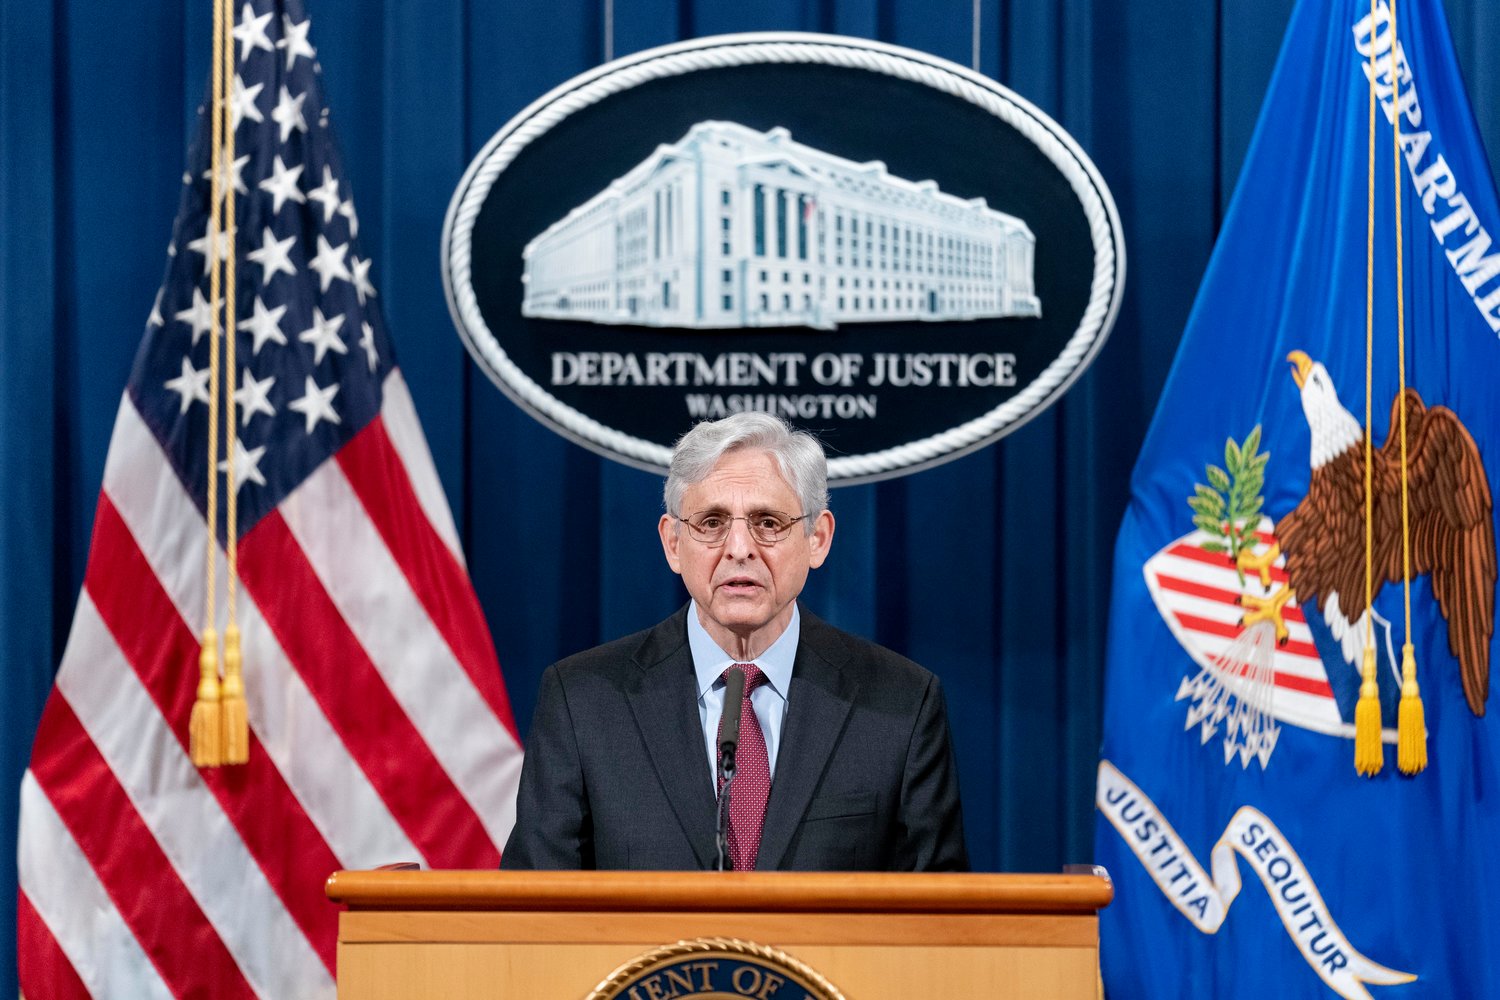 Attorney General Merrick Garland on April 21, 2021, in Washington, D.C. (Andrew Harnik/Pool/Getty Images/TNS)